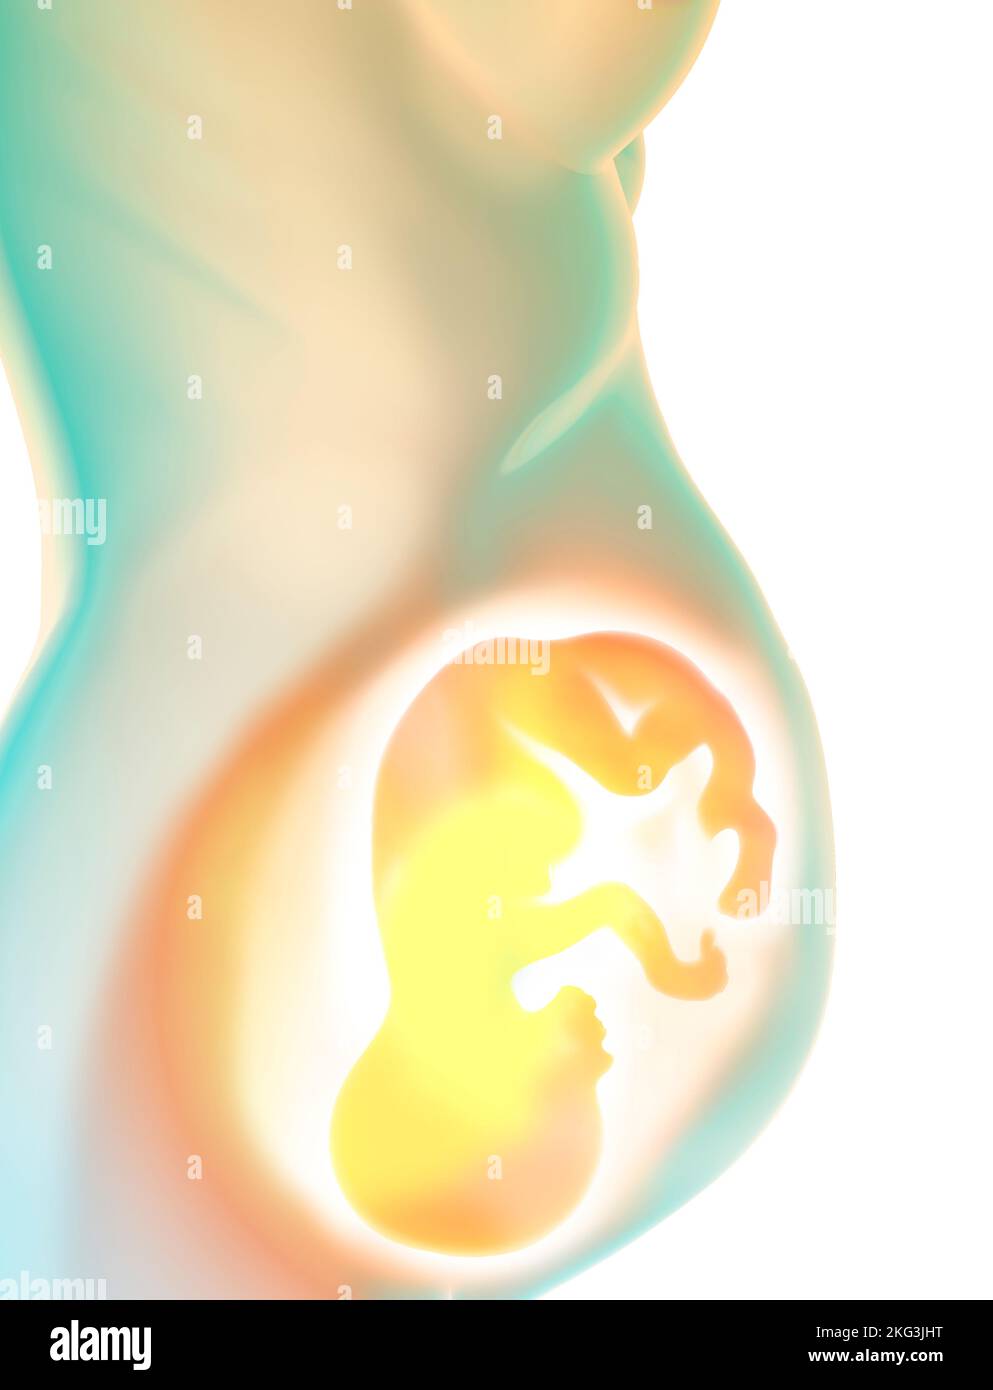 Growth of the fetus, umbilical cord, nourishment and energy for the evolution of the baby. Connection between fetus and placenta. 3d rendering Stock Photo